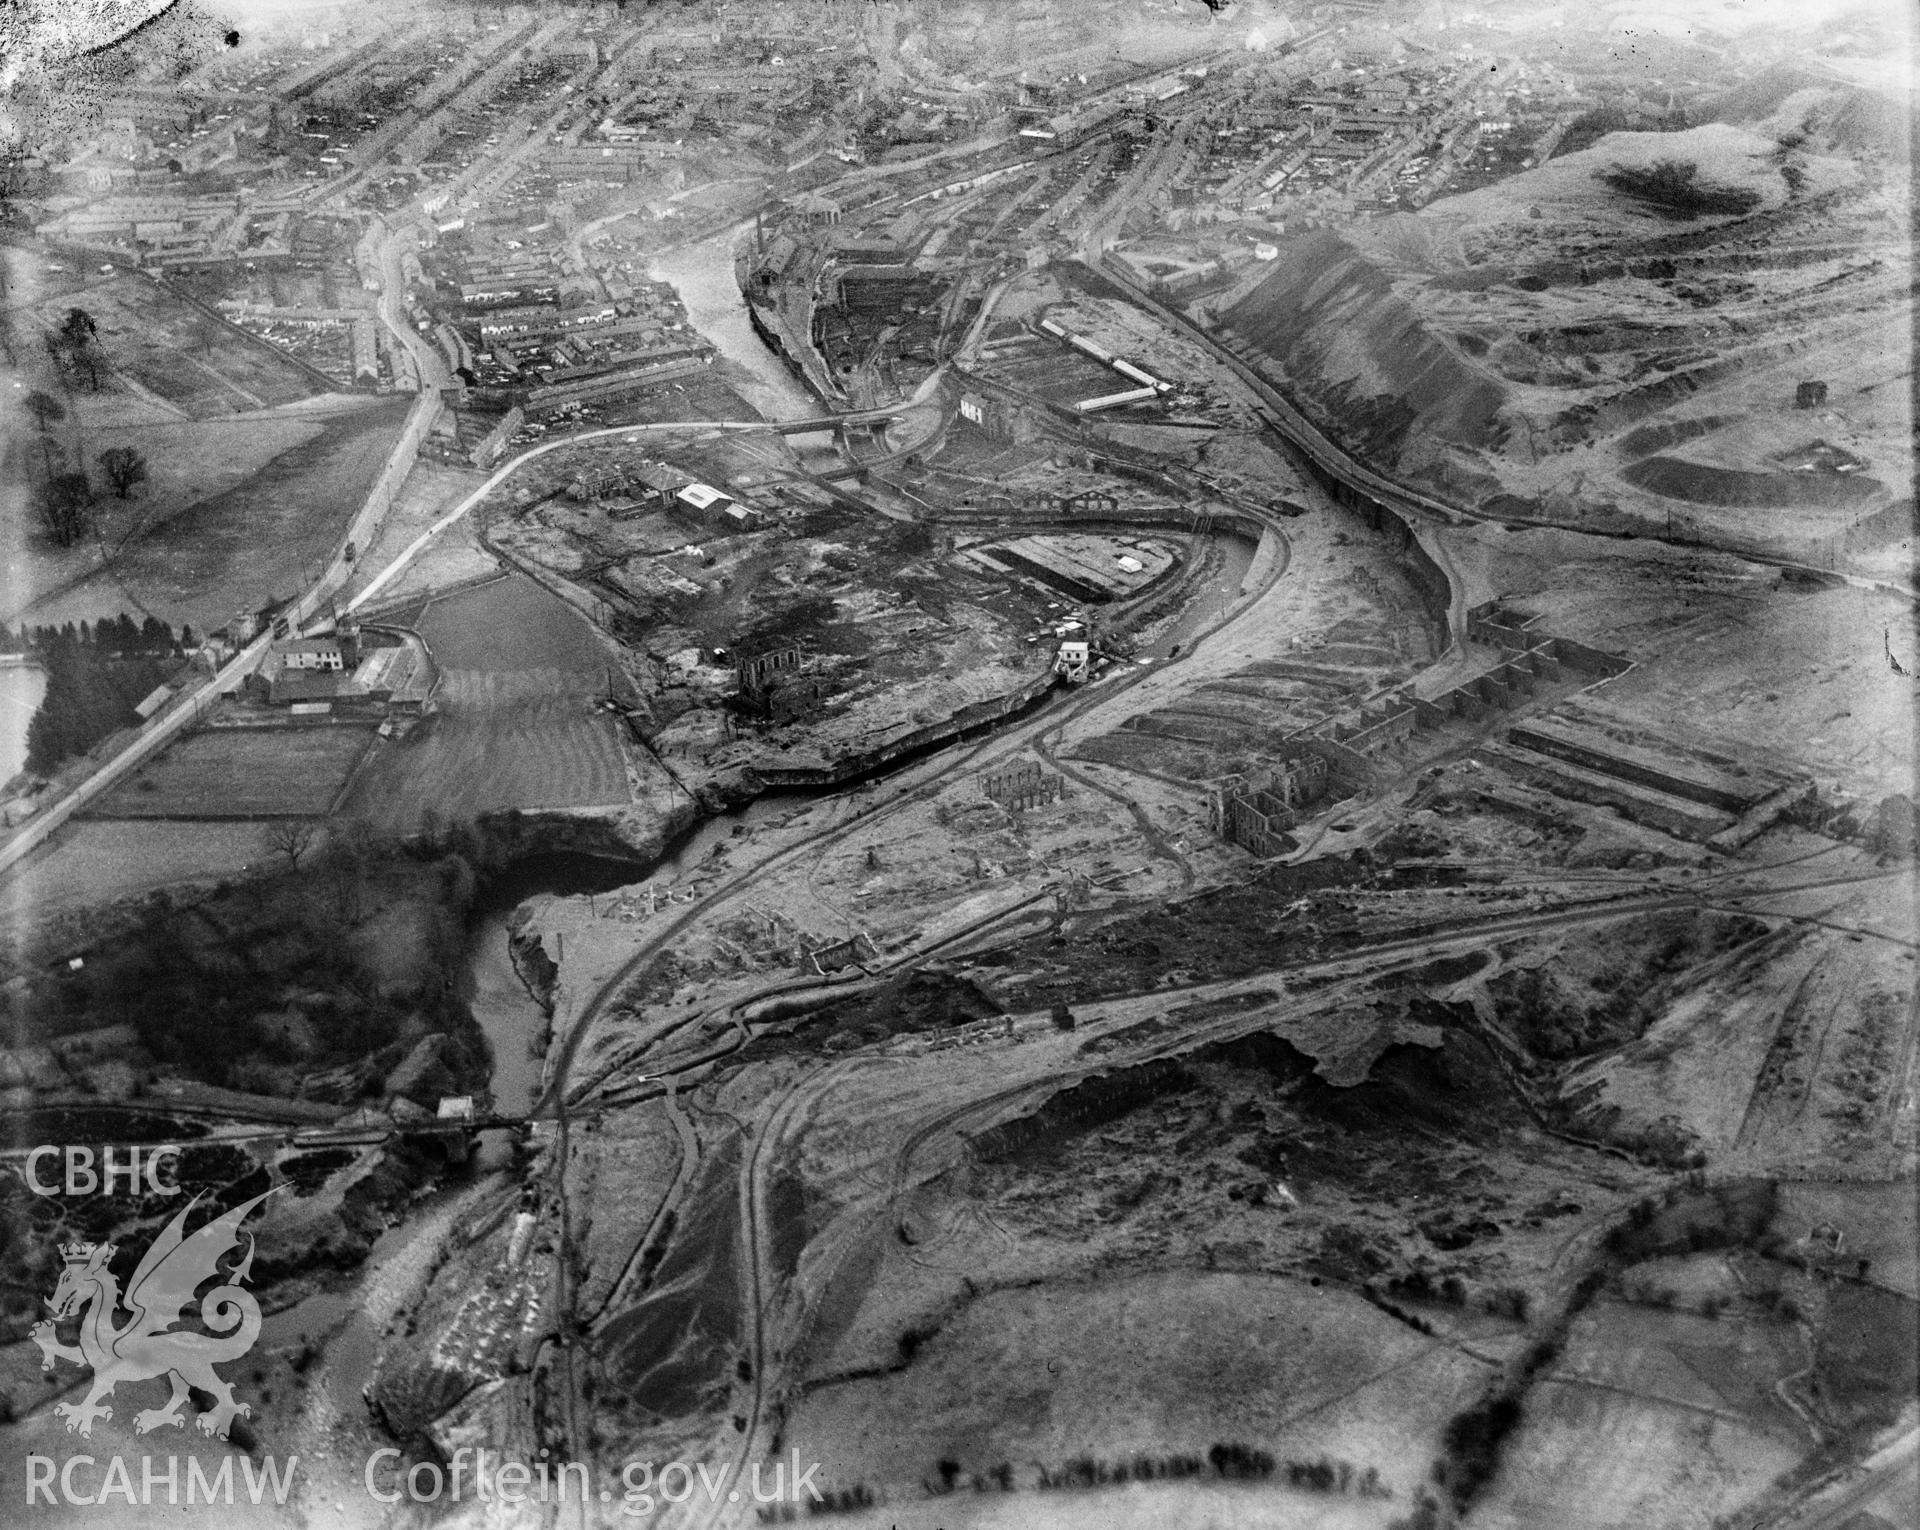 View of Williamstown, Merthyr Tydfil, showing ruined ironworks, oblique aerial view. 5?x4? black and white glass plate negative.